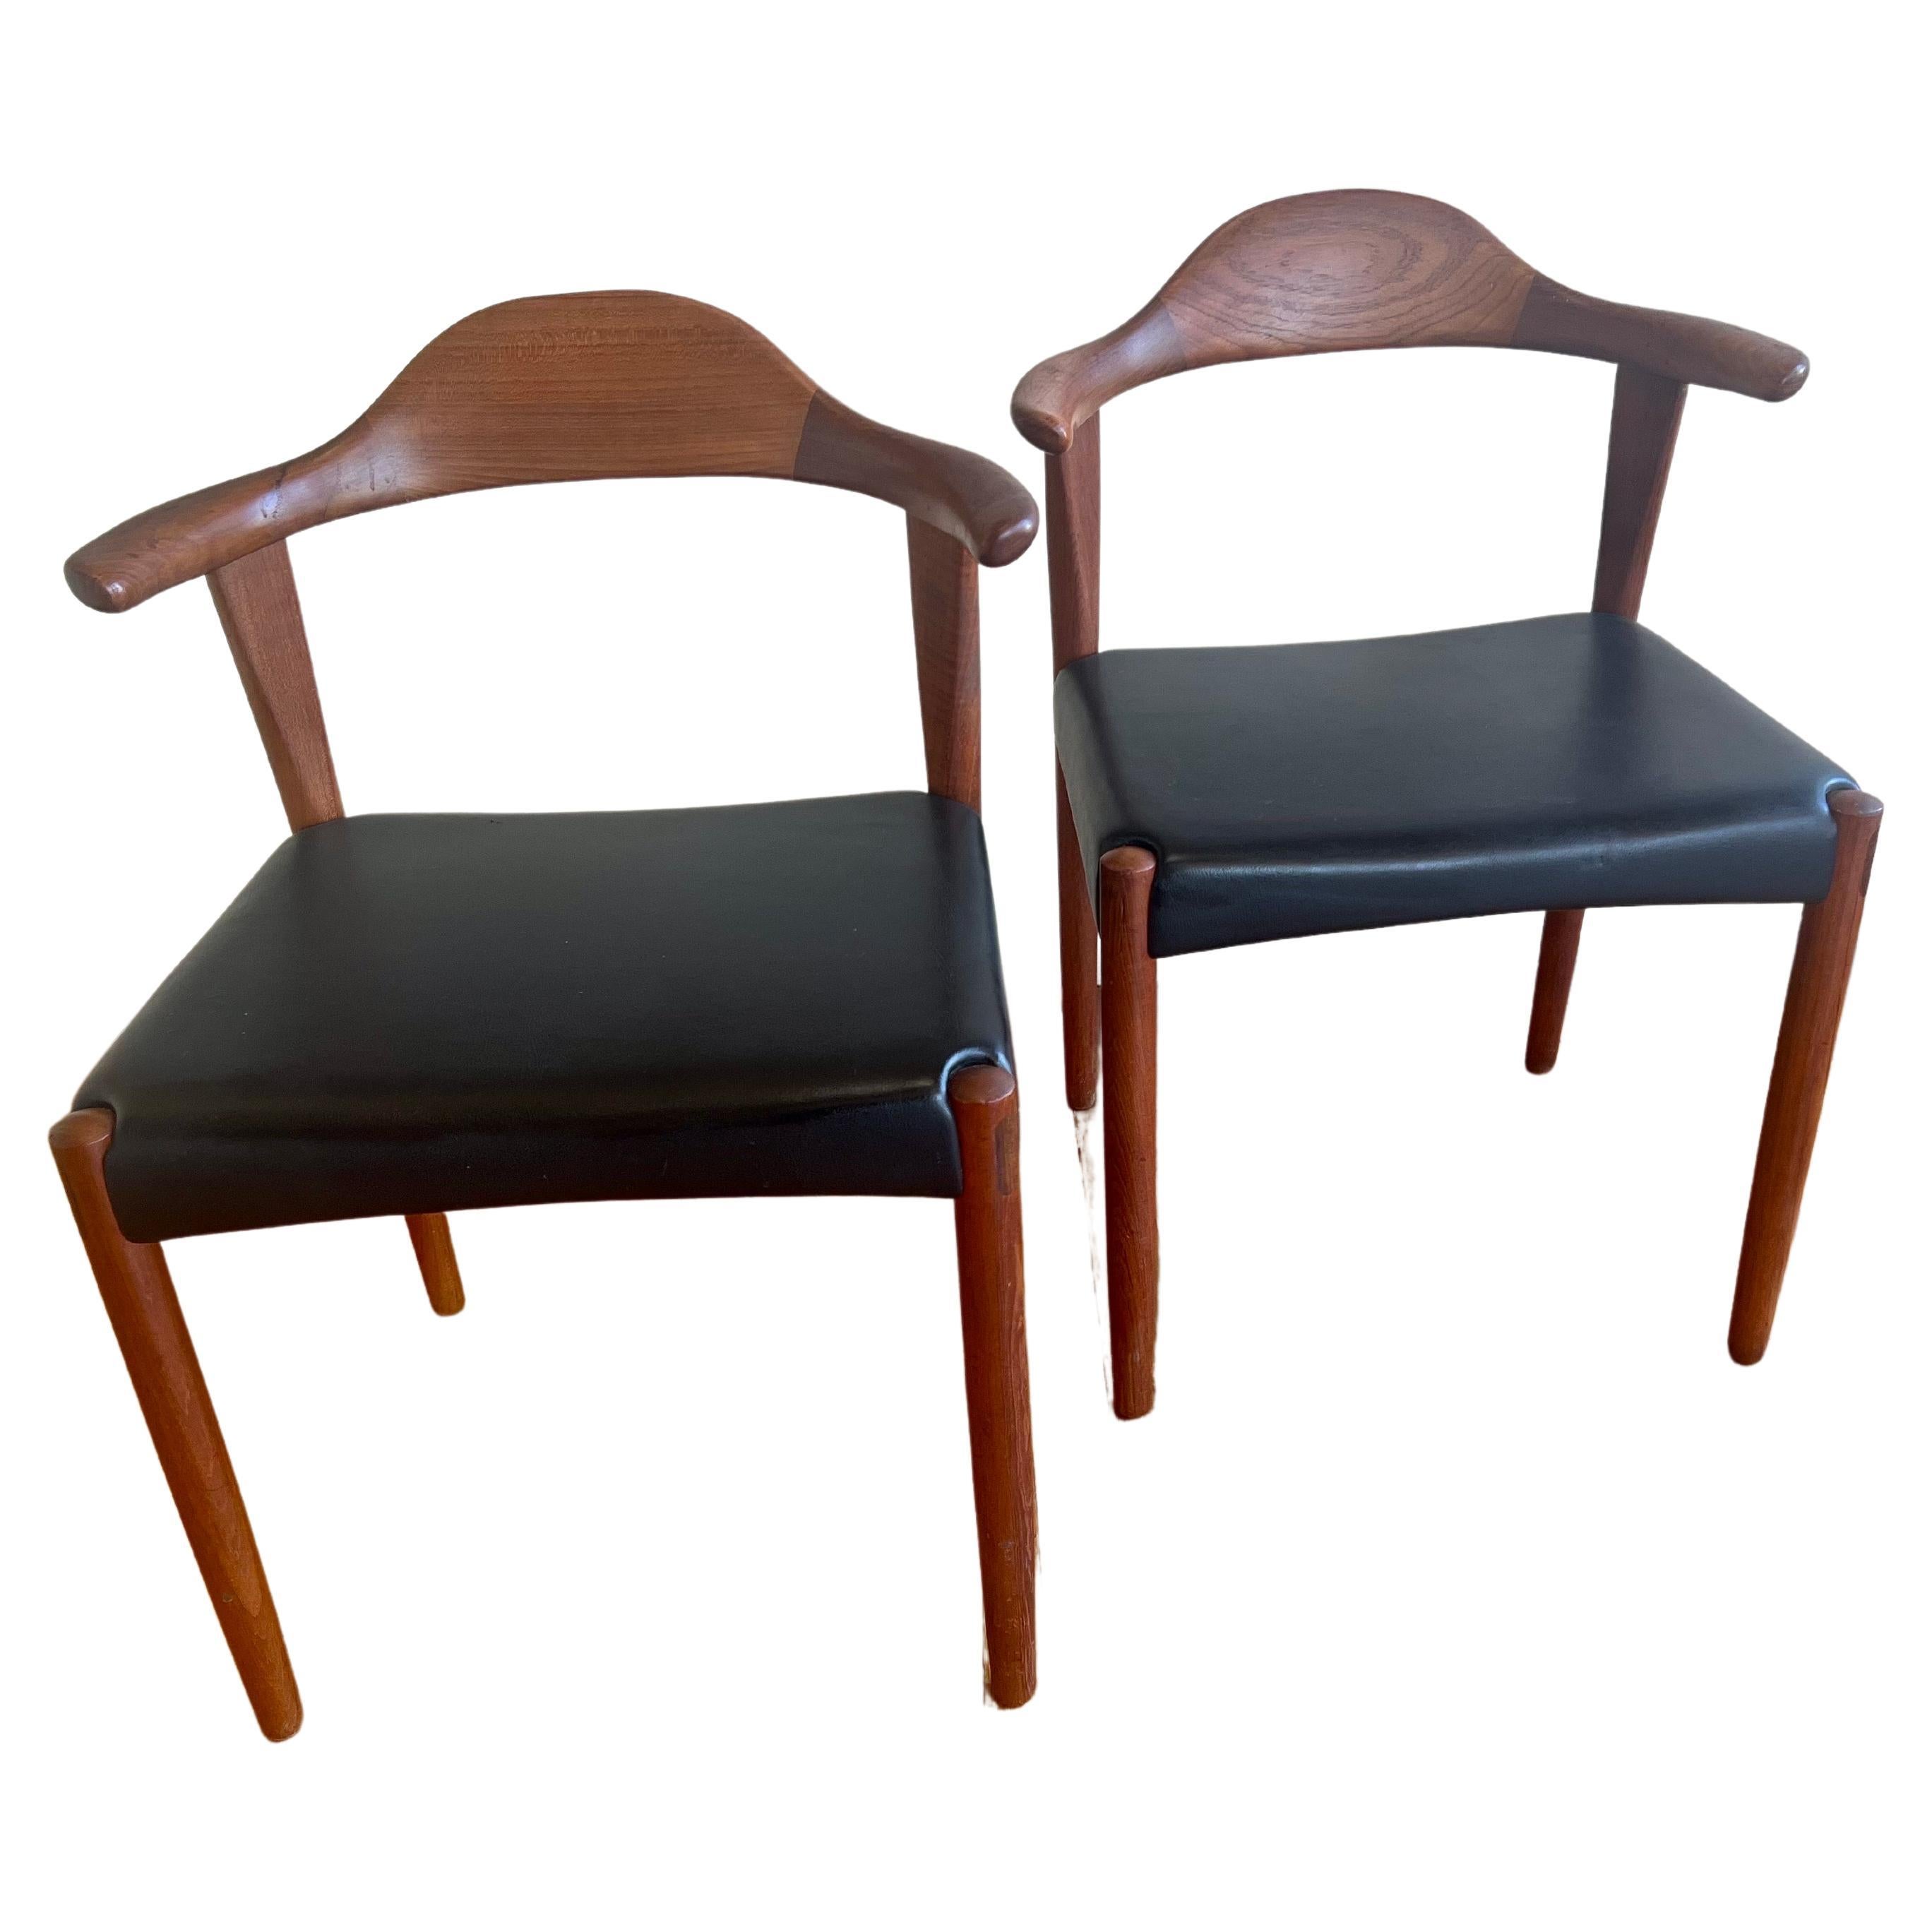 Immerse yourself in the timeless elegance of mid-century Danish design with this exquisite pair of 'Bull Horn' chairs crafted by Harry Østergaard for Randers Møbelfabrik in the 1950s. These chairs stand as a testament to the unparalleled